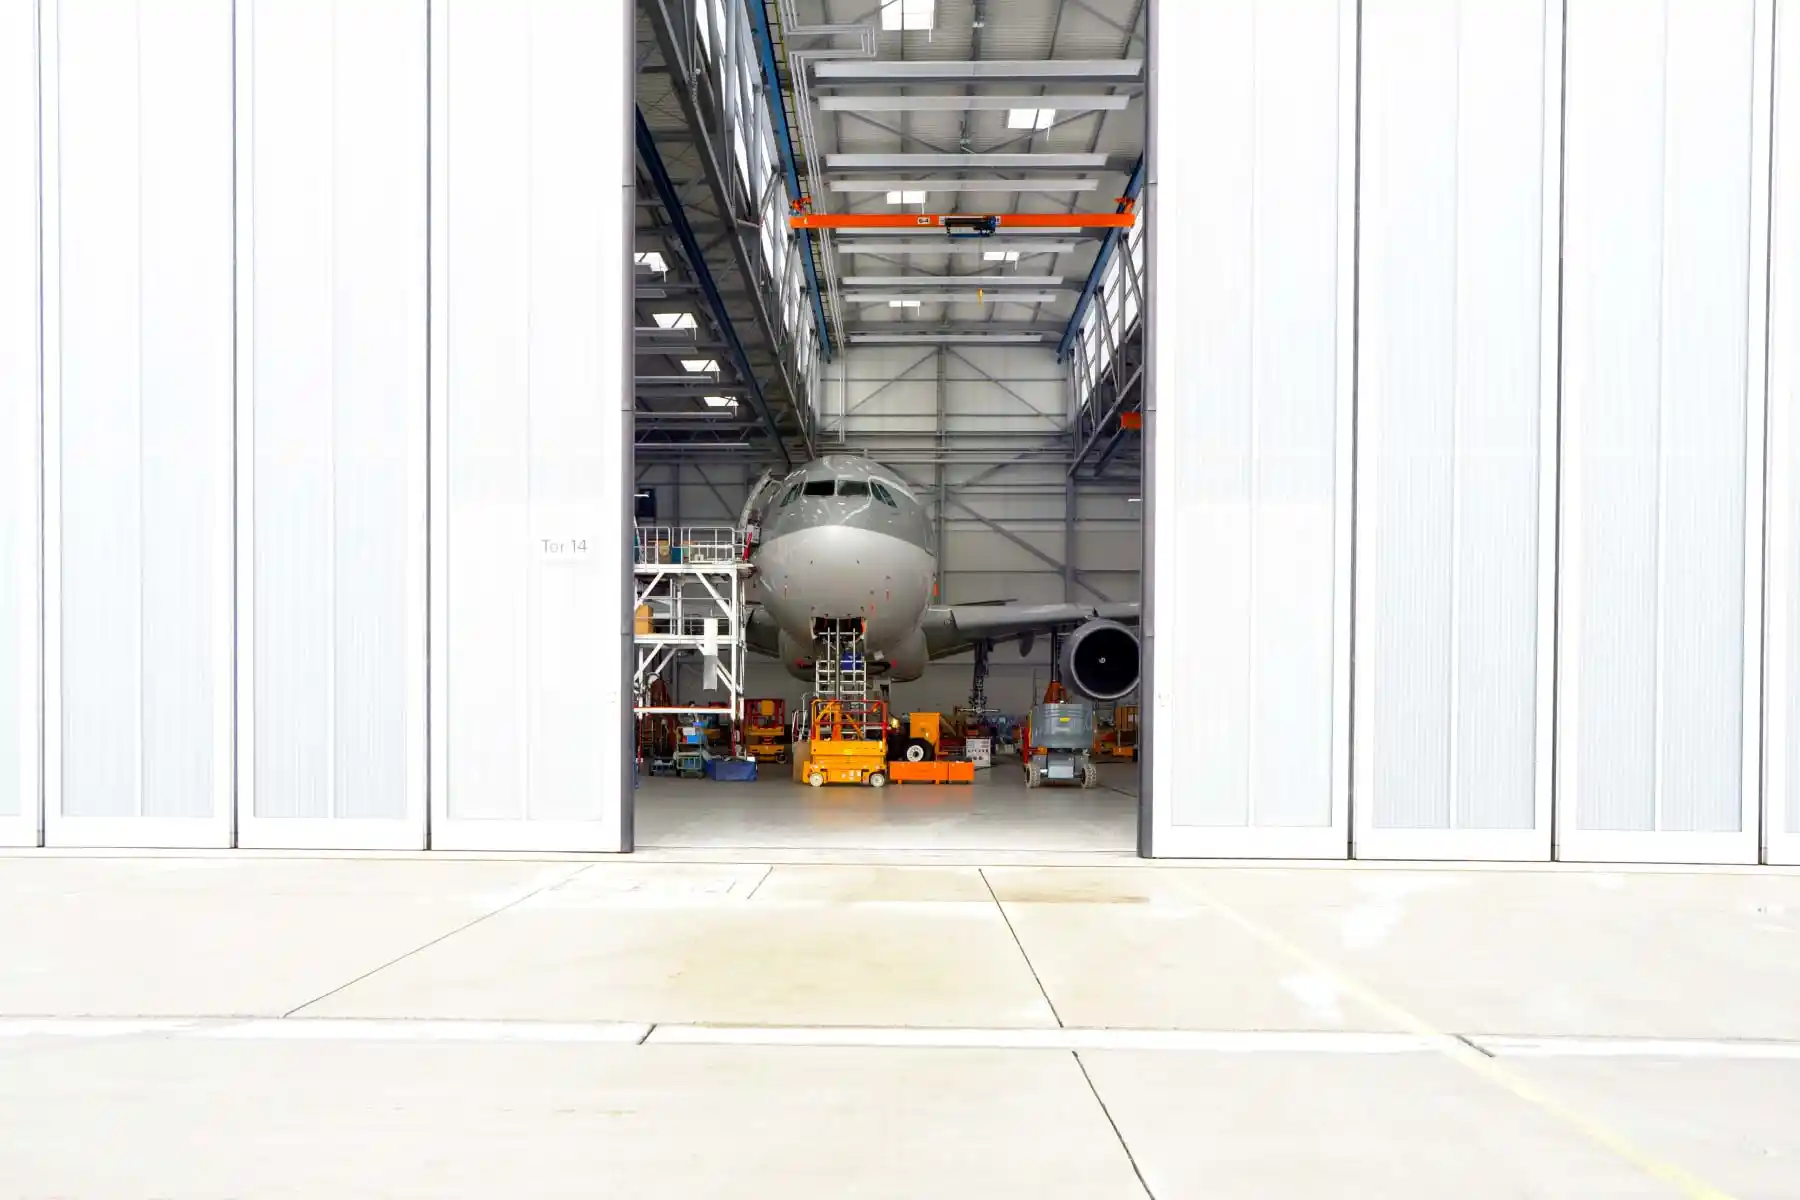 Airplane in hanger